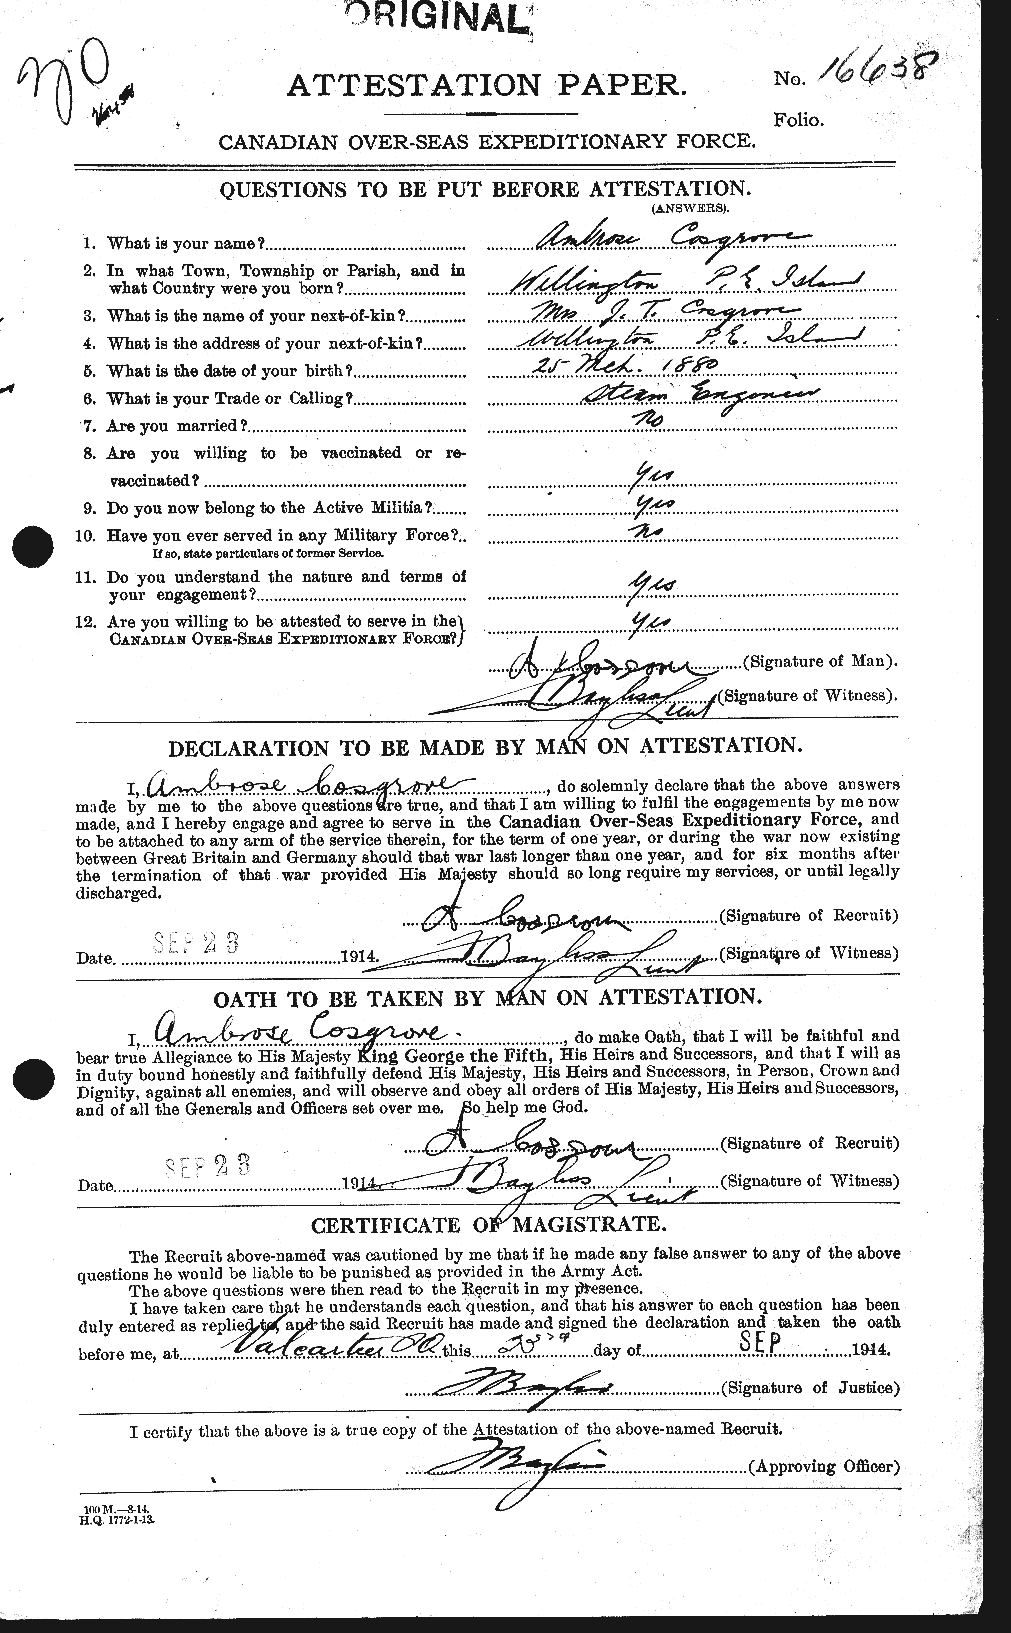 Personnel Records of the First World War - CEF 057969a